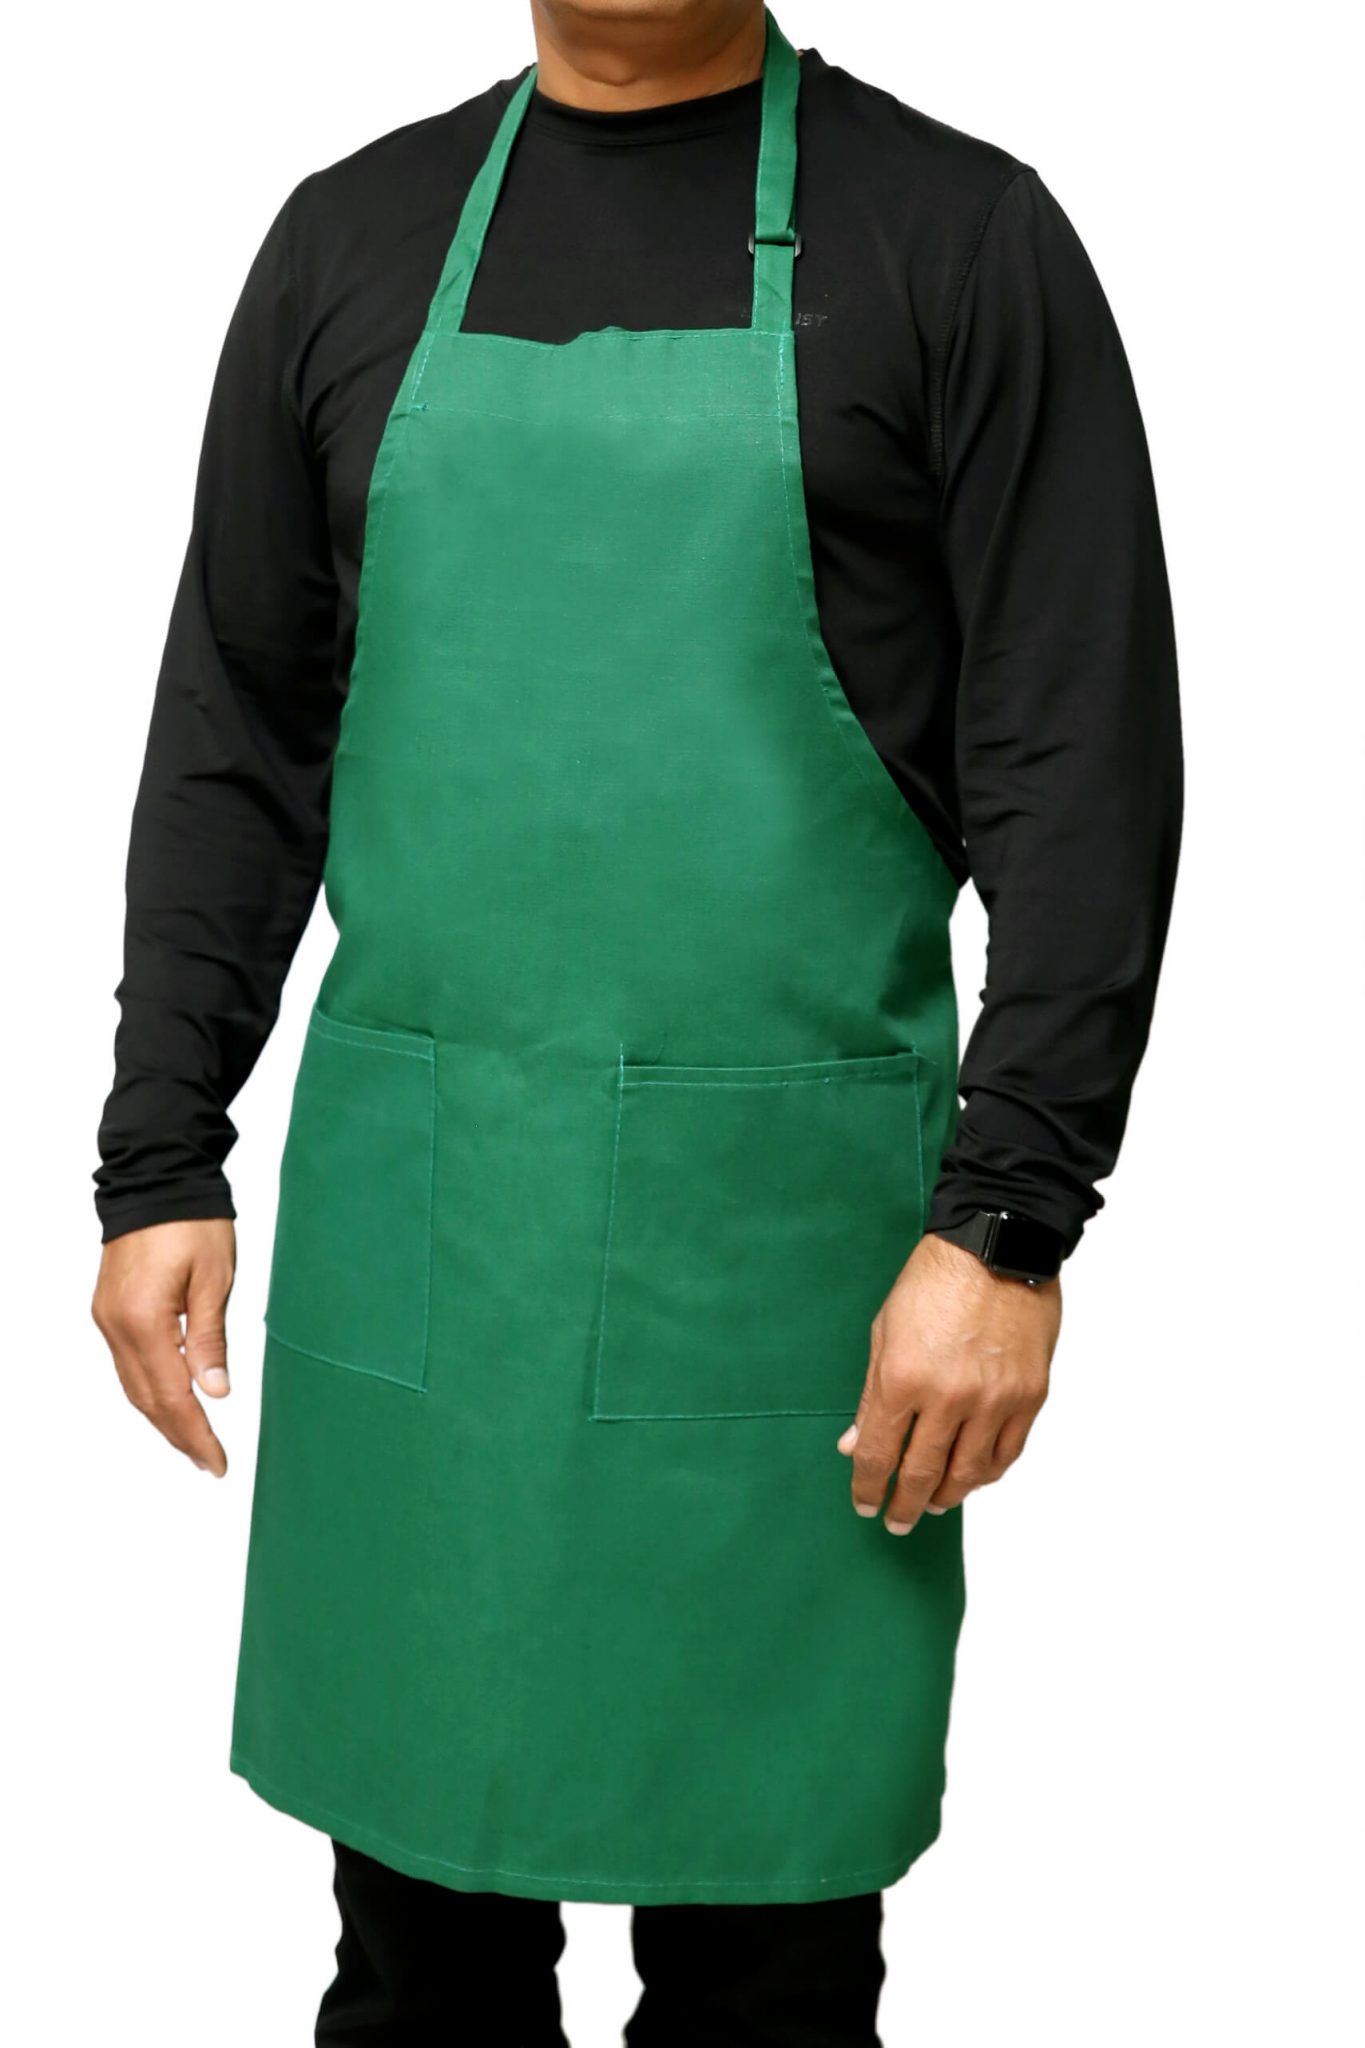 Home Aprons